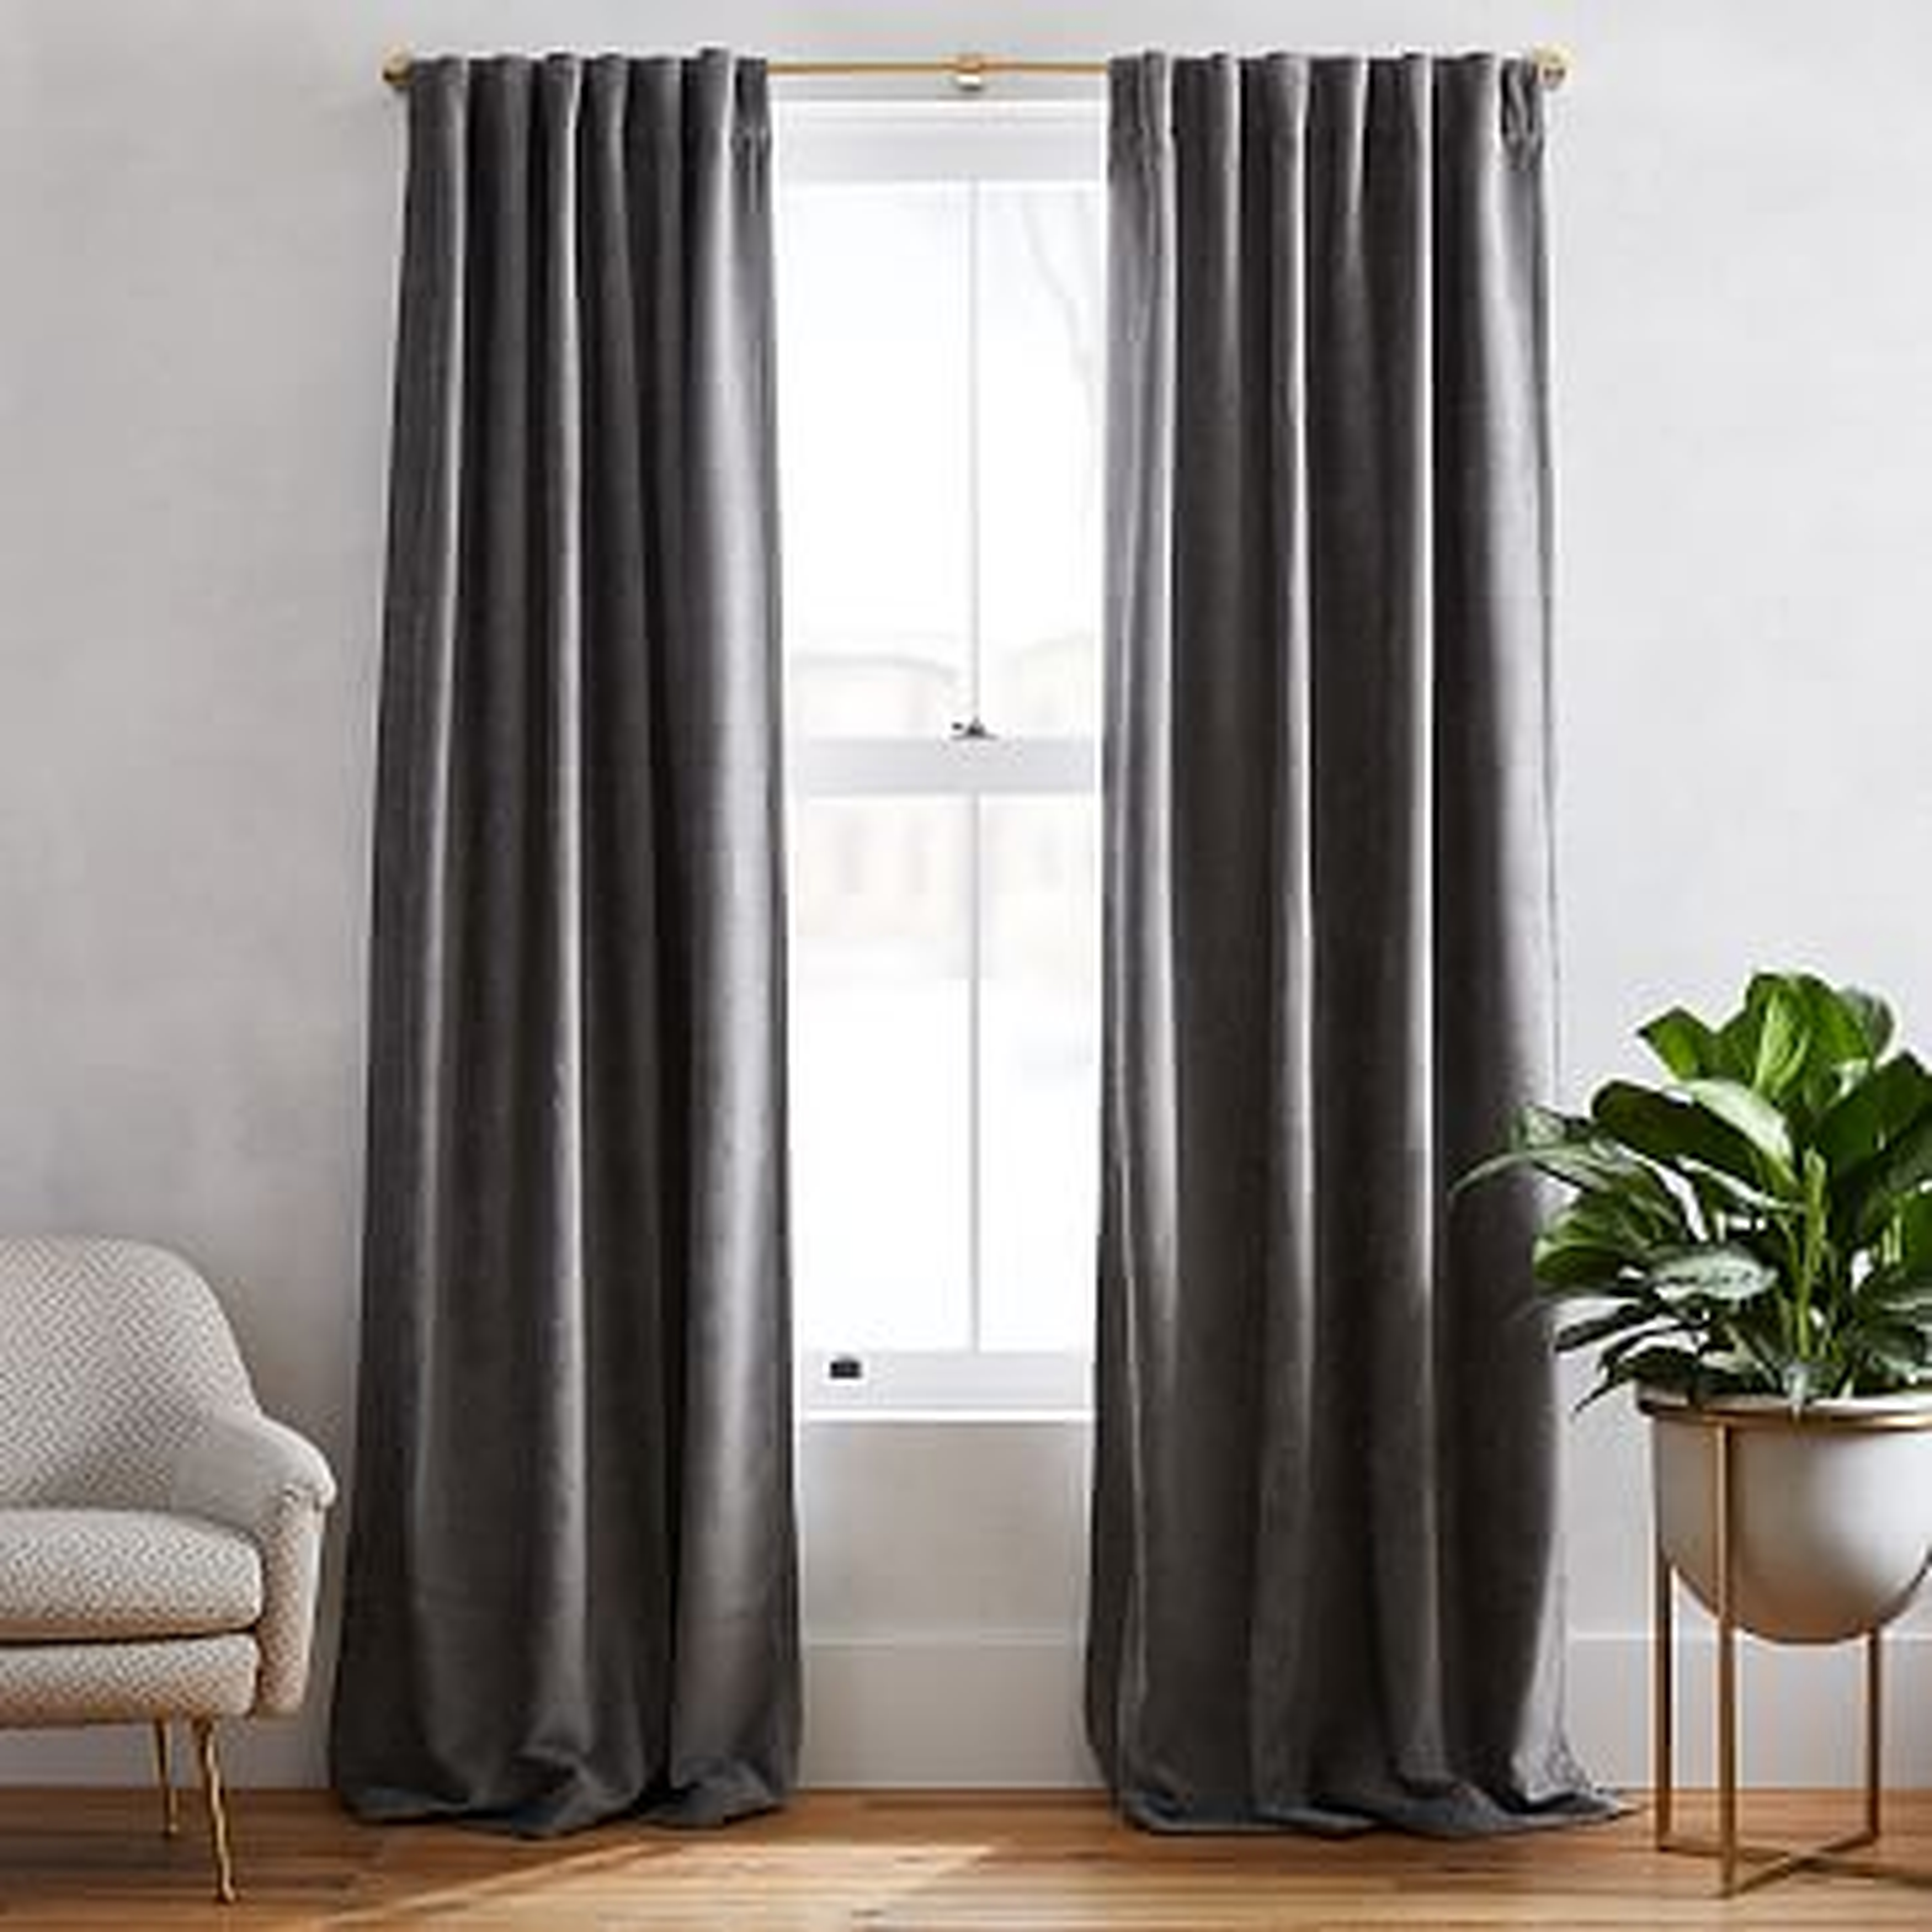 Textured Upholstery Velvet Curtain with Black Out, Set of 2, Metal, 48"x84" - West Elm